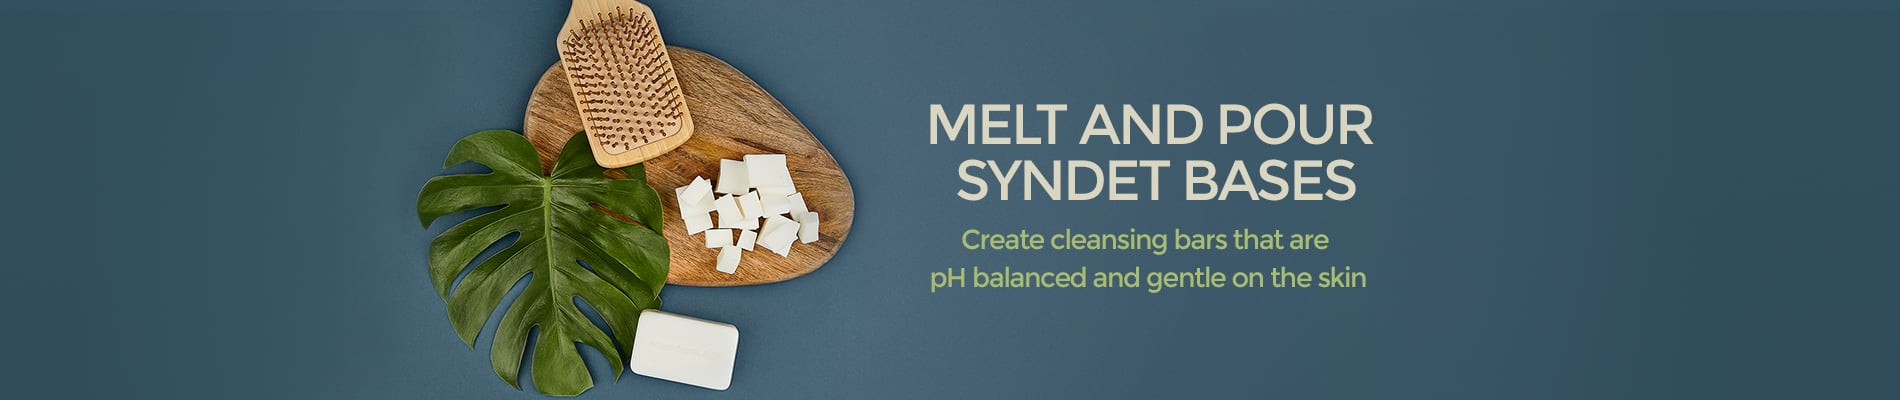 Melt and Pour Syndet Bases at Wholesale Prices From New Directions Aromatics